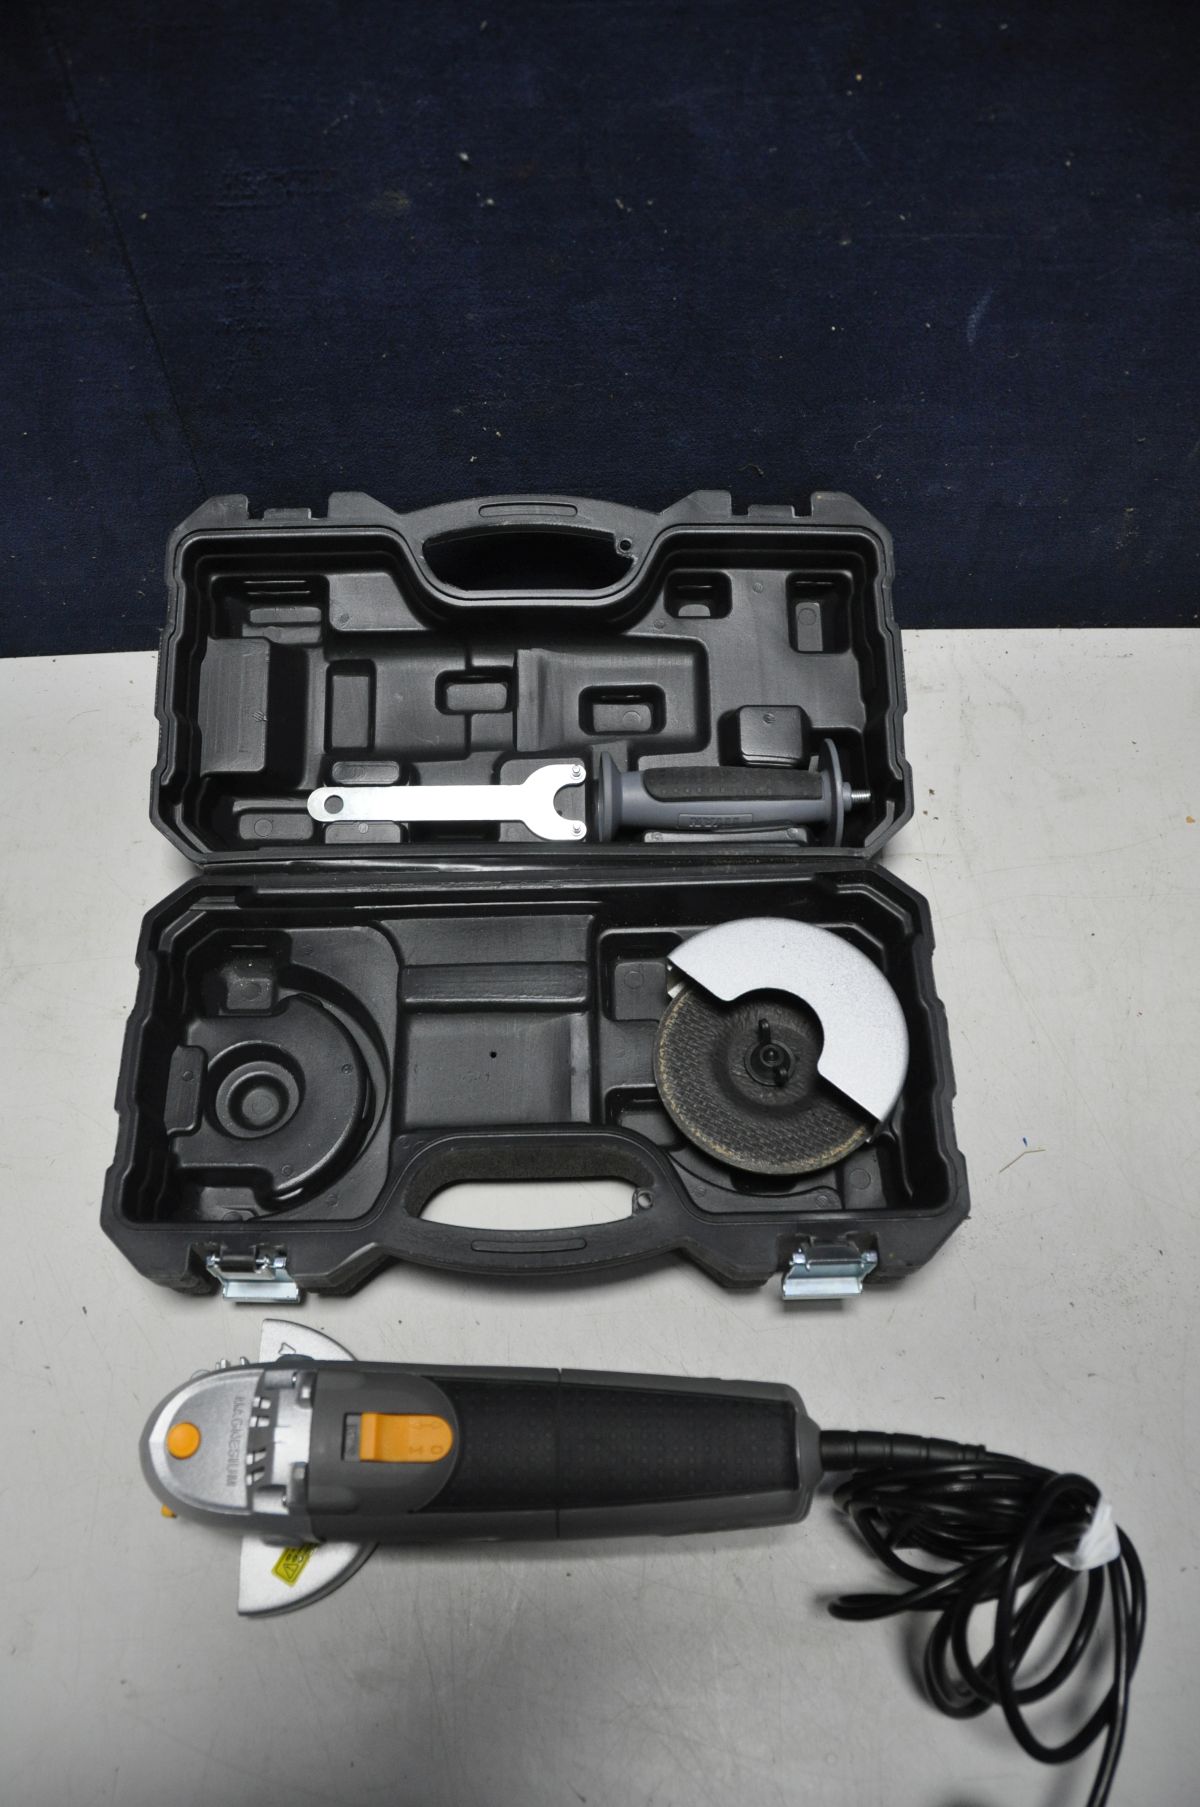 A CHAMPION CRHD850 850w rotary hammer drill in case with drill bits, a Titan TTB281GRD angle grinder - Image 4 of 4